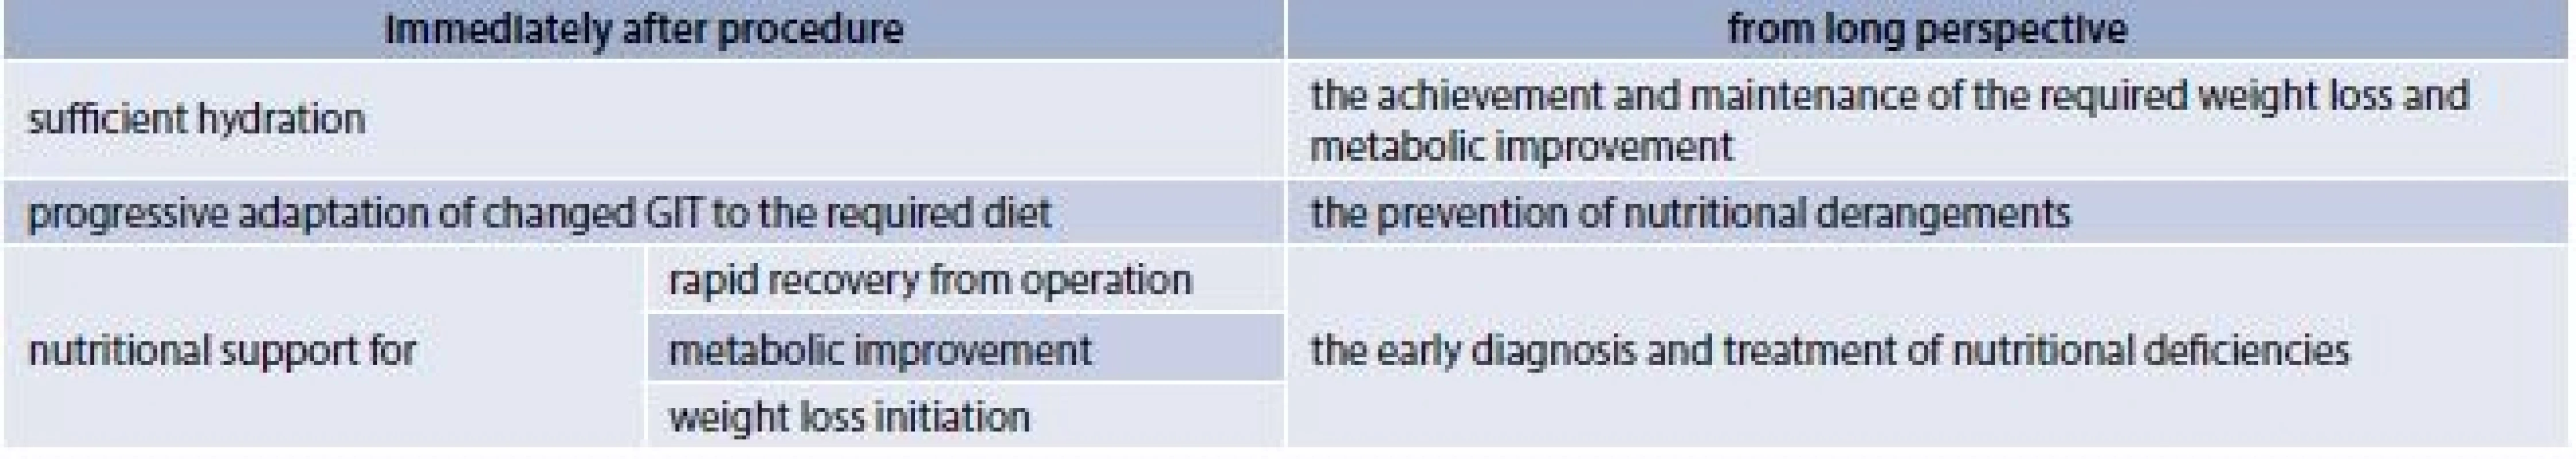 Goals of dietary management in both short and long-term postoperative period